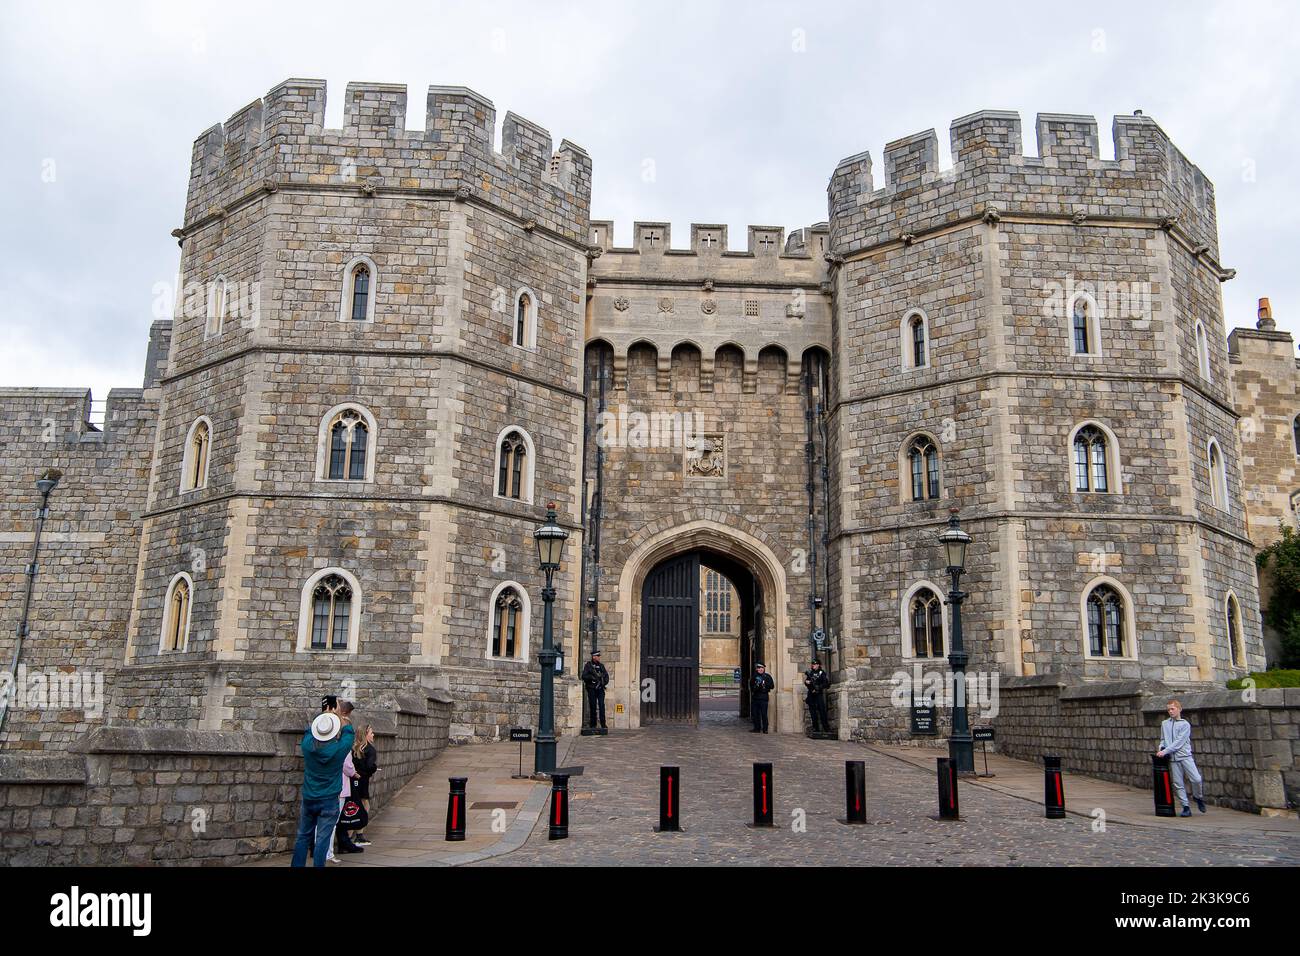 Windsor, Berkshire, UK. 27th September, 2022. Windsor Castle is due to reopen later this week. Following the sad passing of Her Majesty the Queen, the Royal Mourning Period has now ended. After thousands of mourners flooded into Windsor to lay flowers, Windsor was much quieter today. Credit: Maureen McLean/Alamy Live News Stock Photo